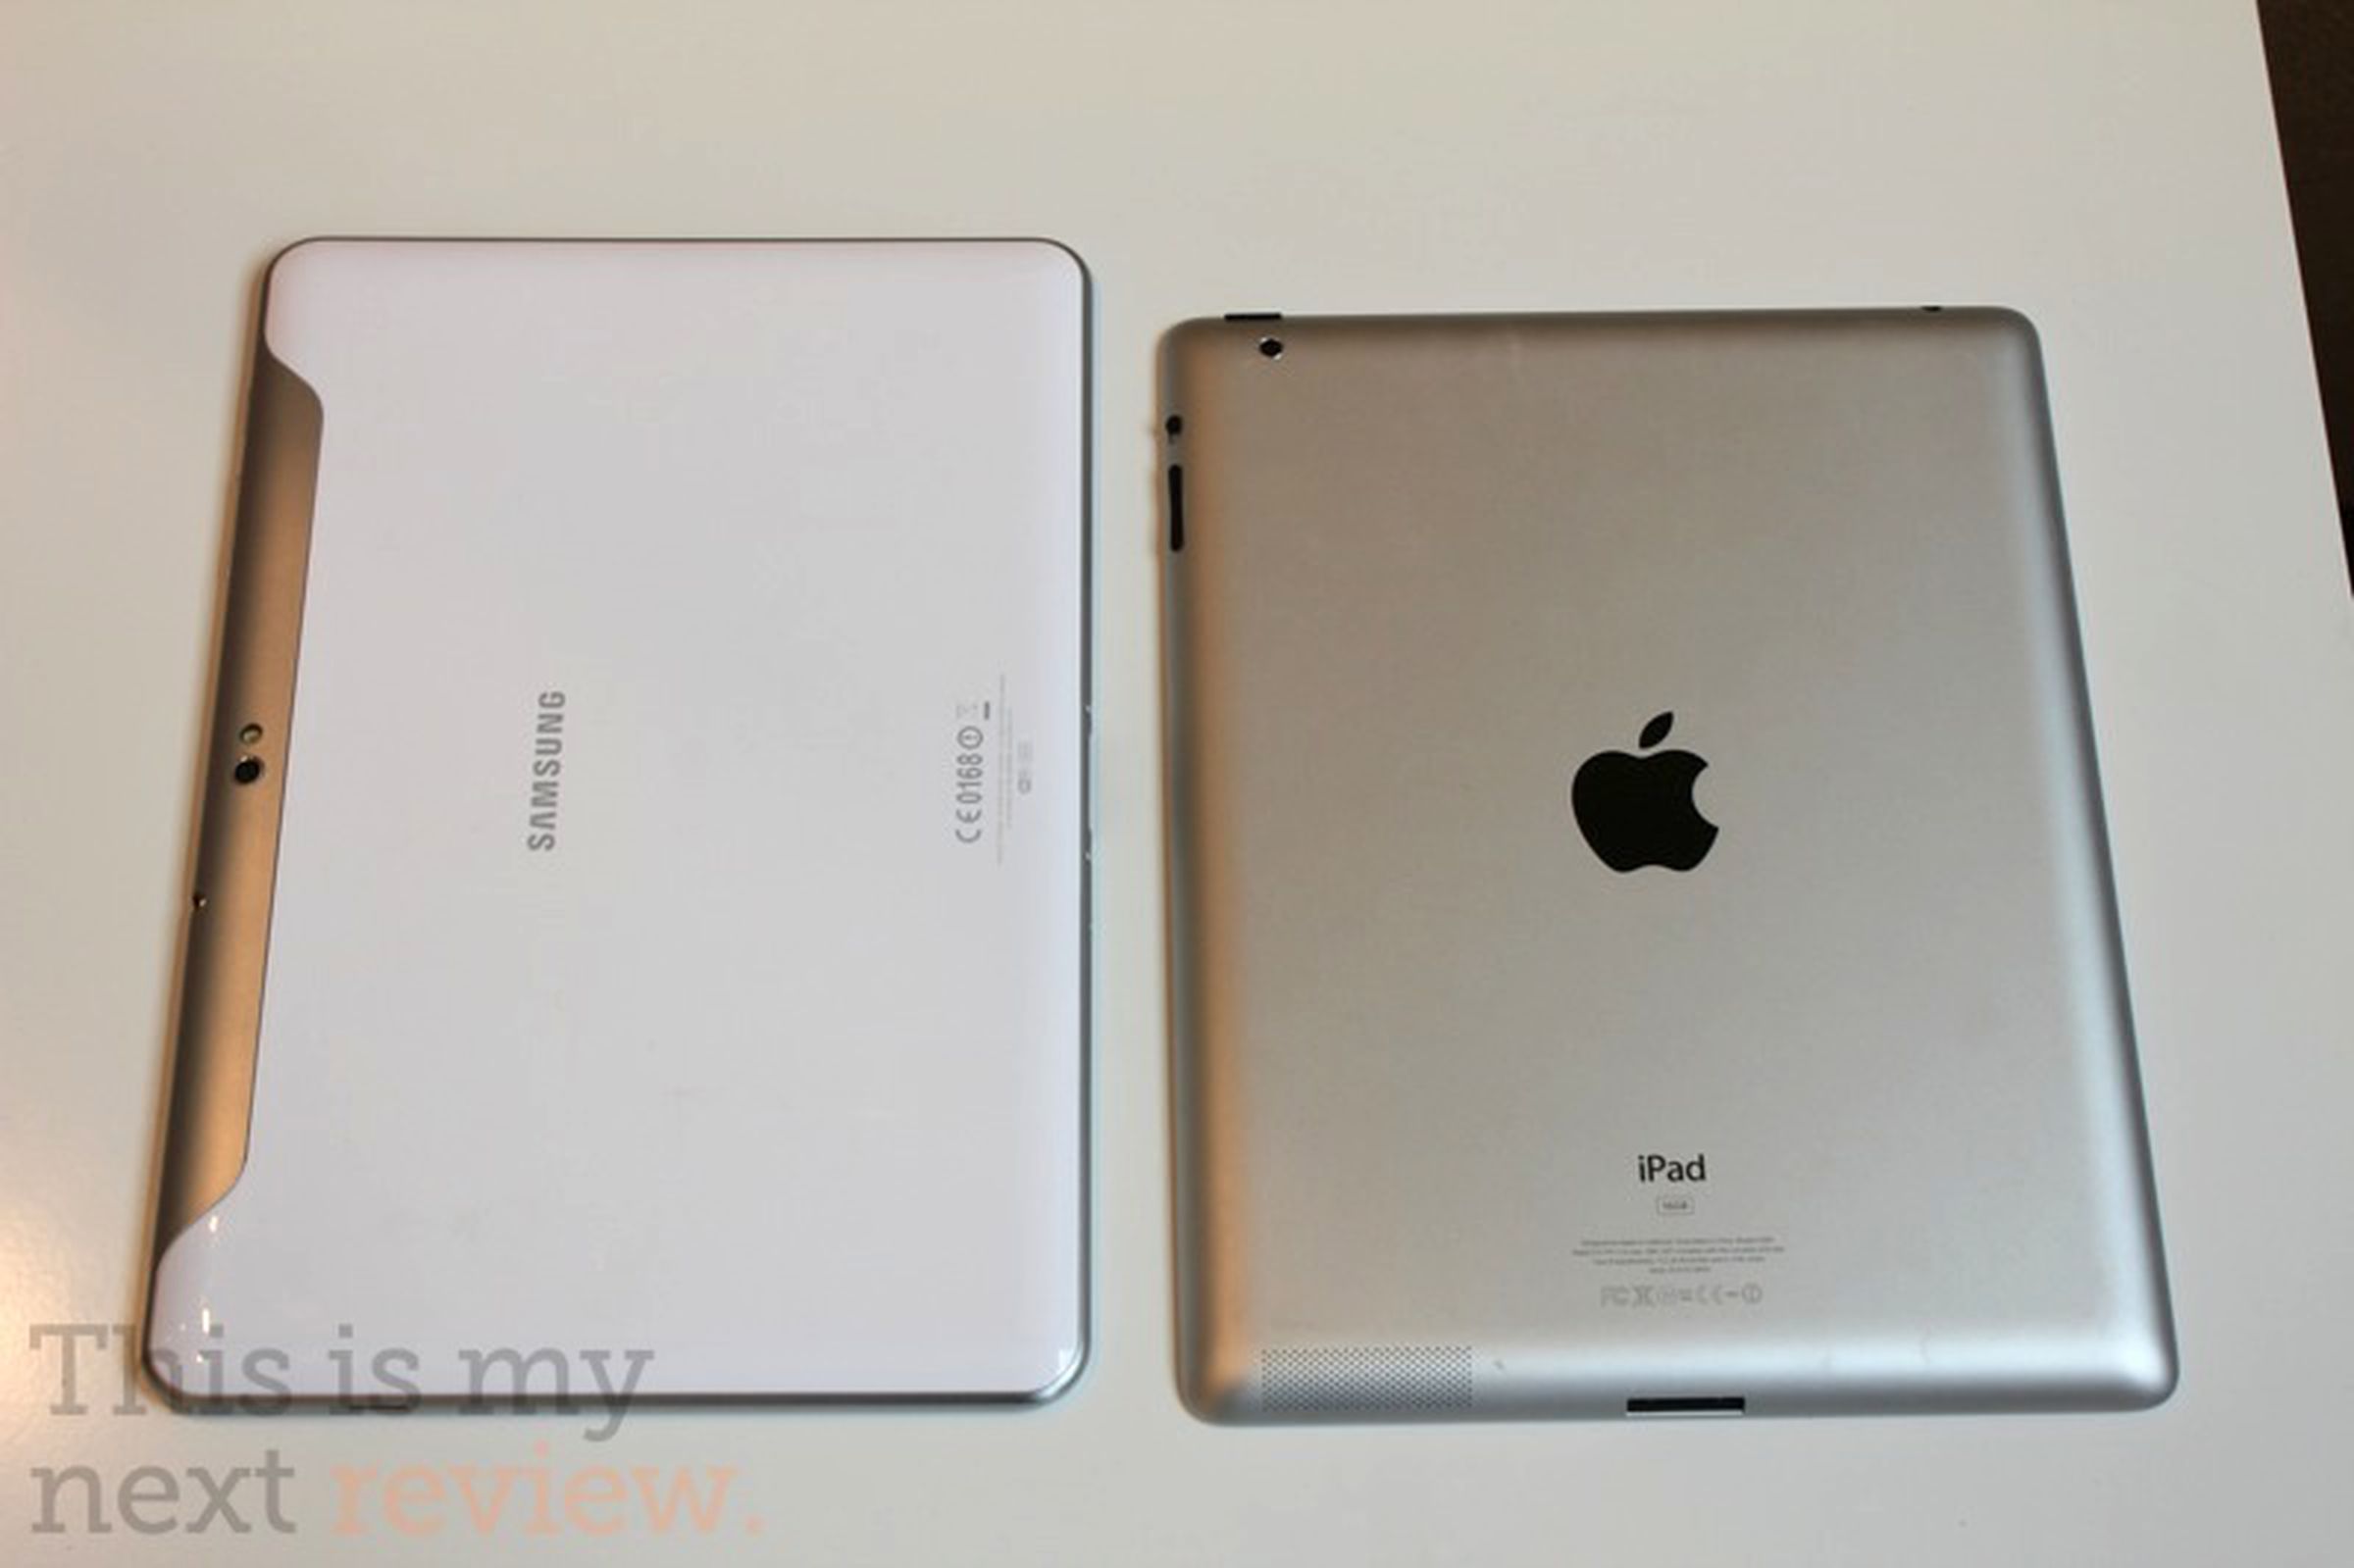 Samsung Galaxy Tab 10.1 review pictures